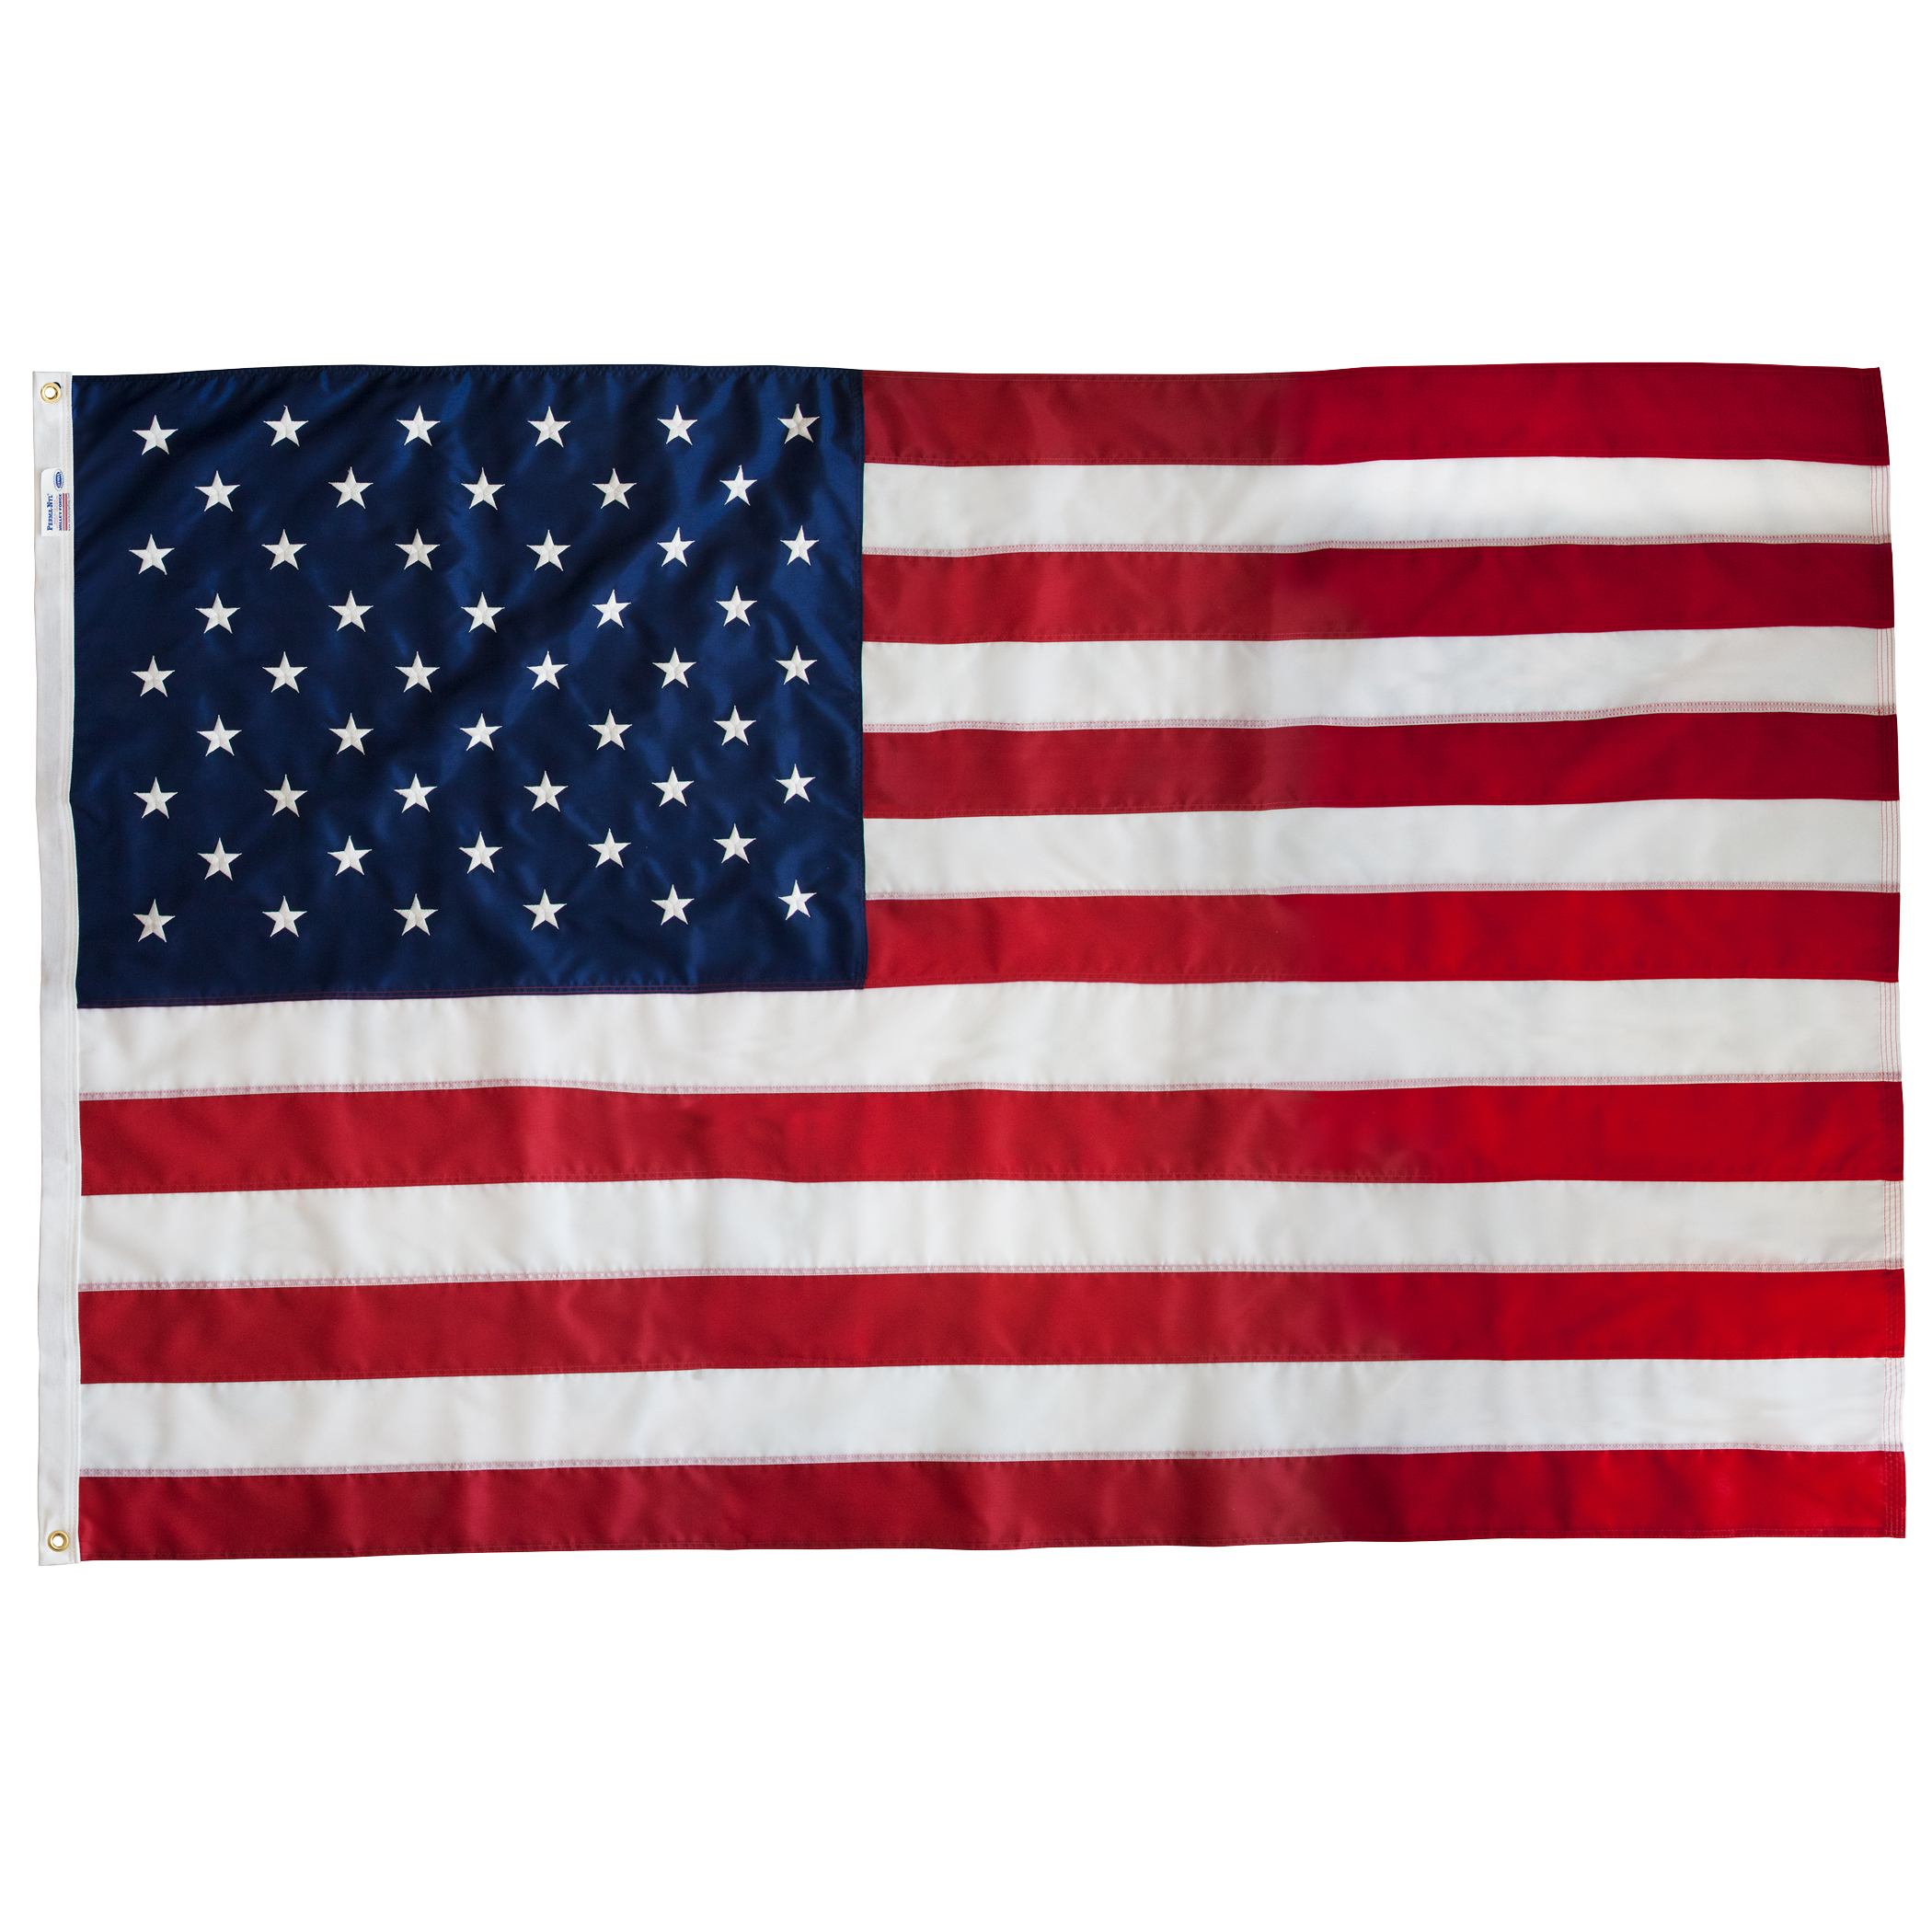 American Nylon Sewn and Embroidered Flag with Brass Grommets by Betsy Flags, 4' x 6' - image 4 of 7